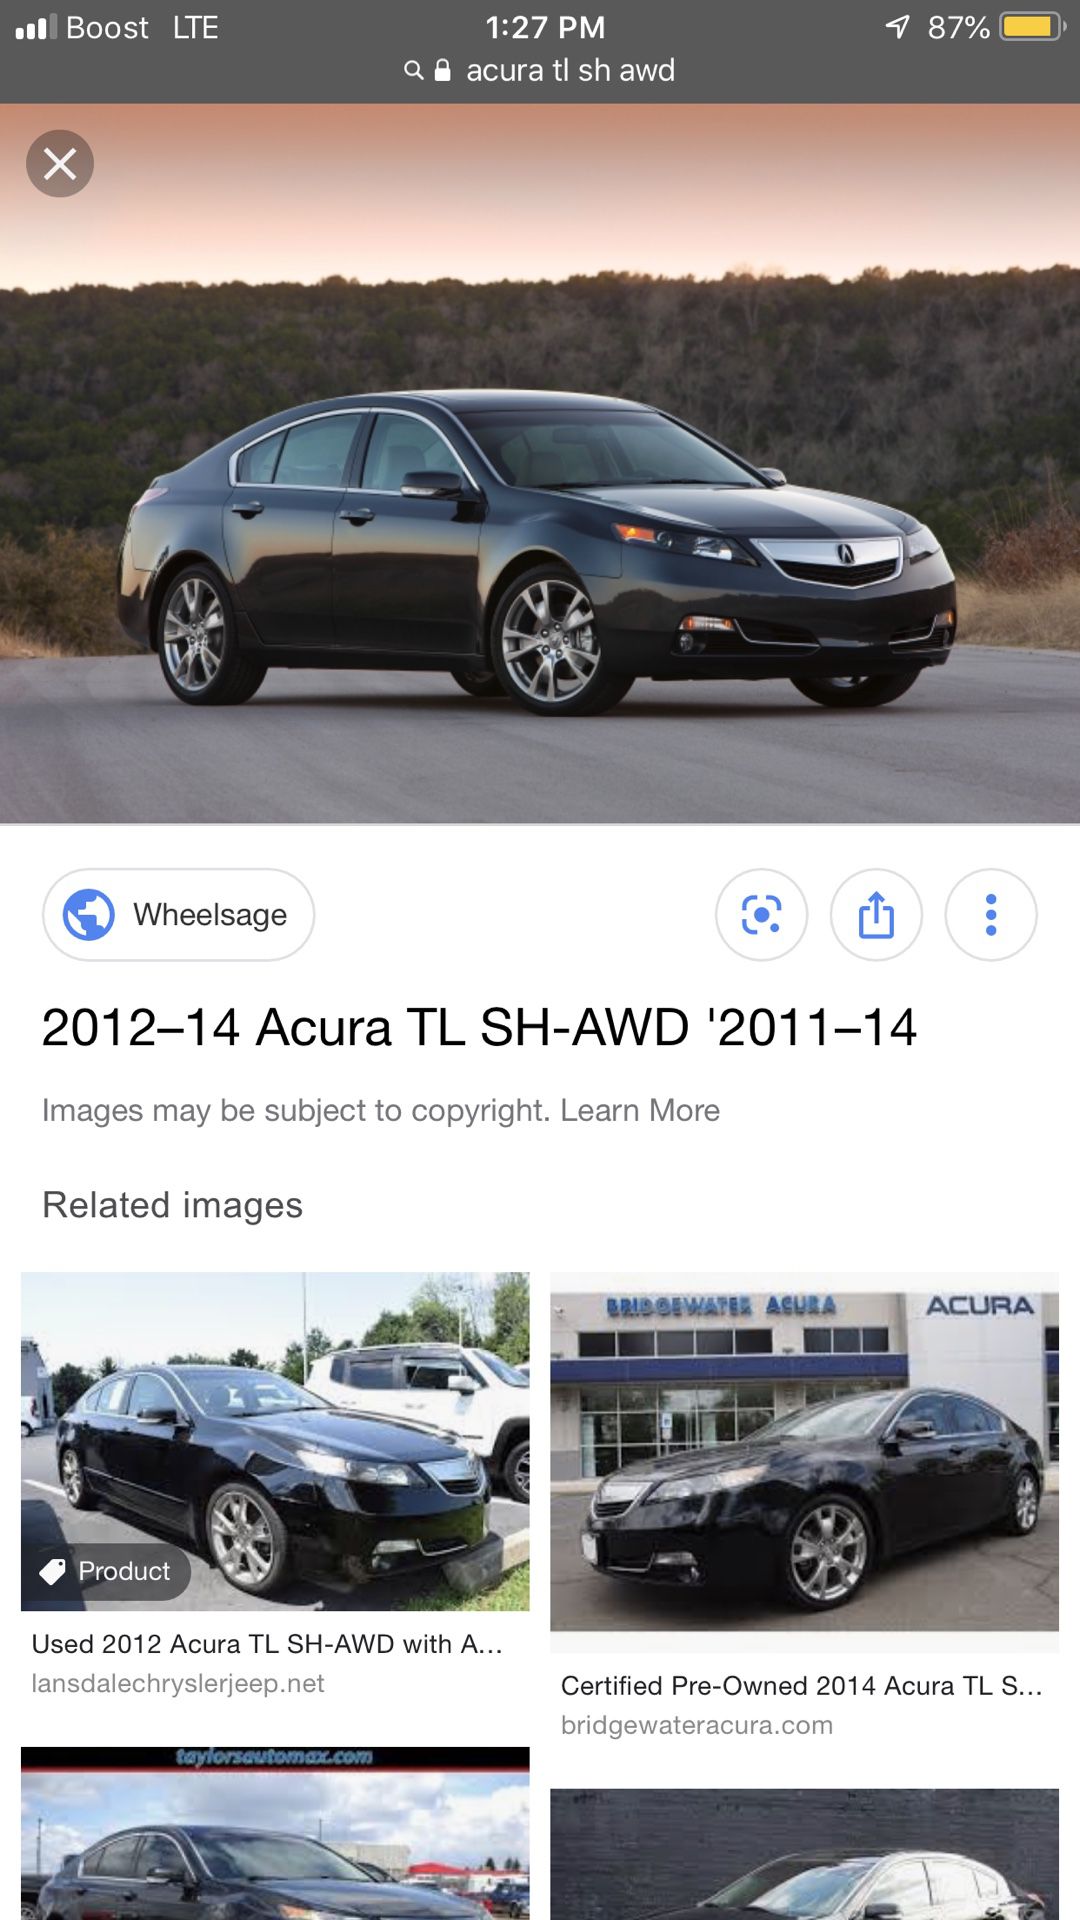 Looking to buy used Acura TL sh awd for sell